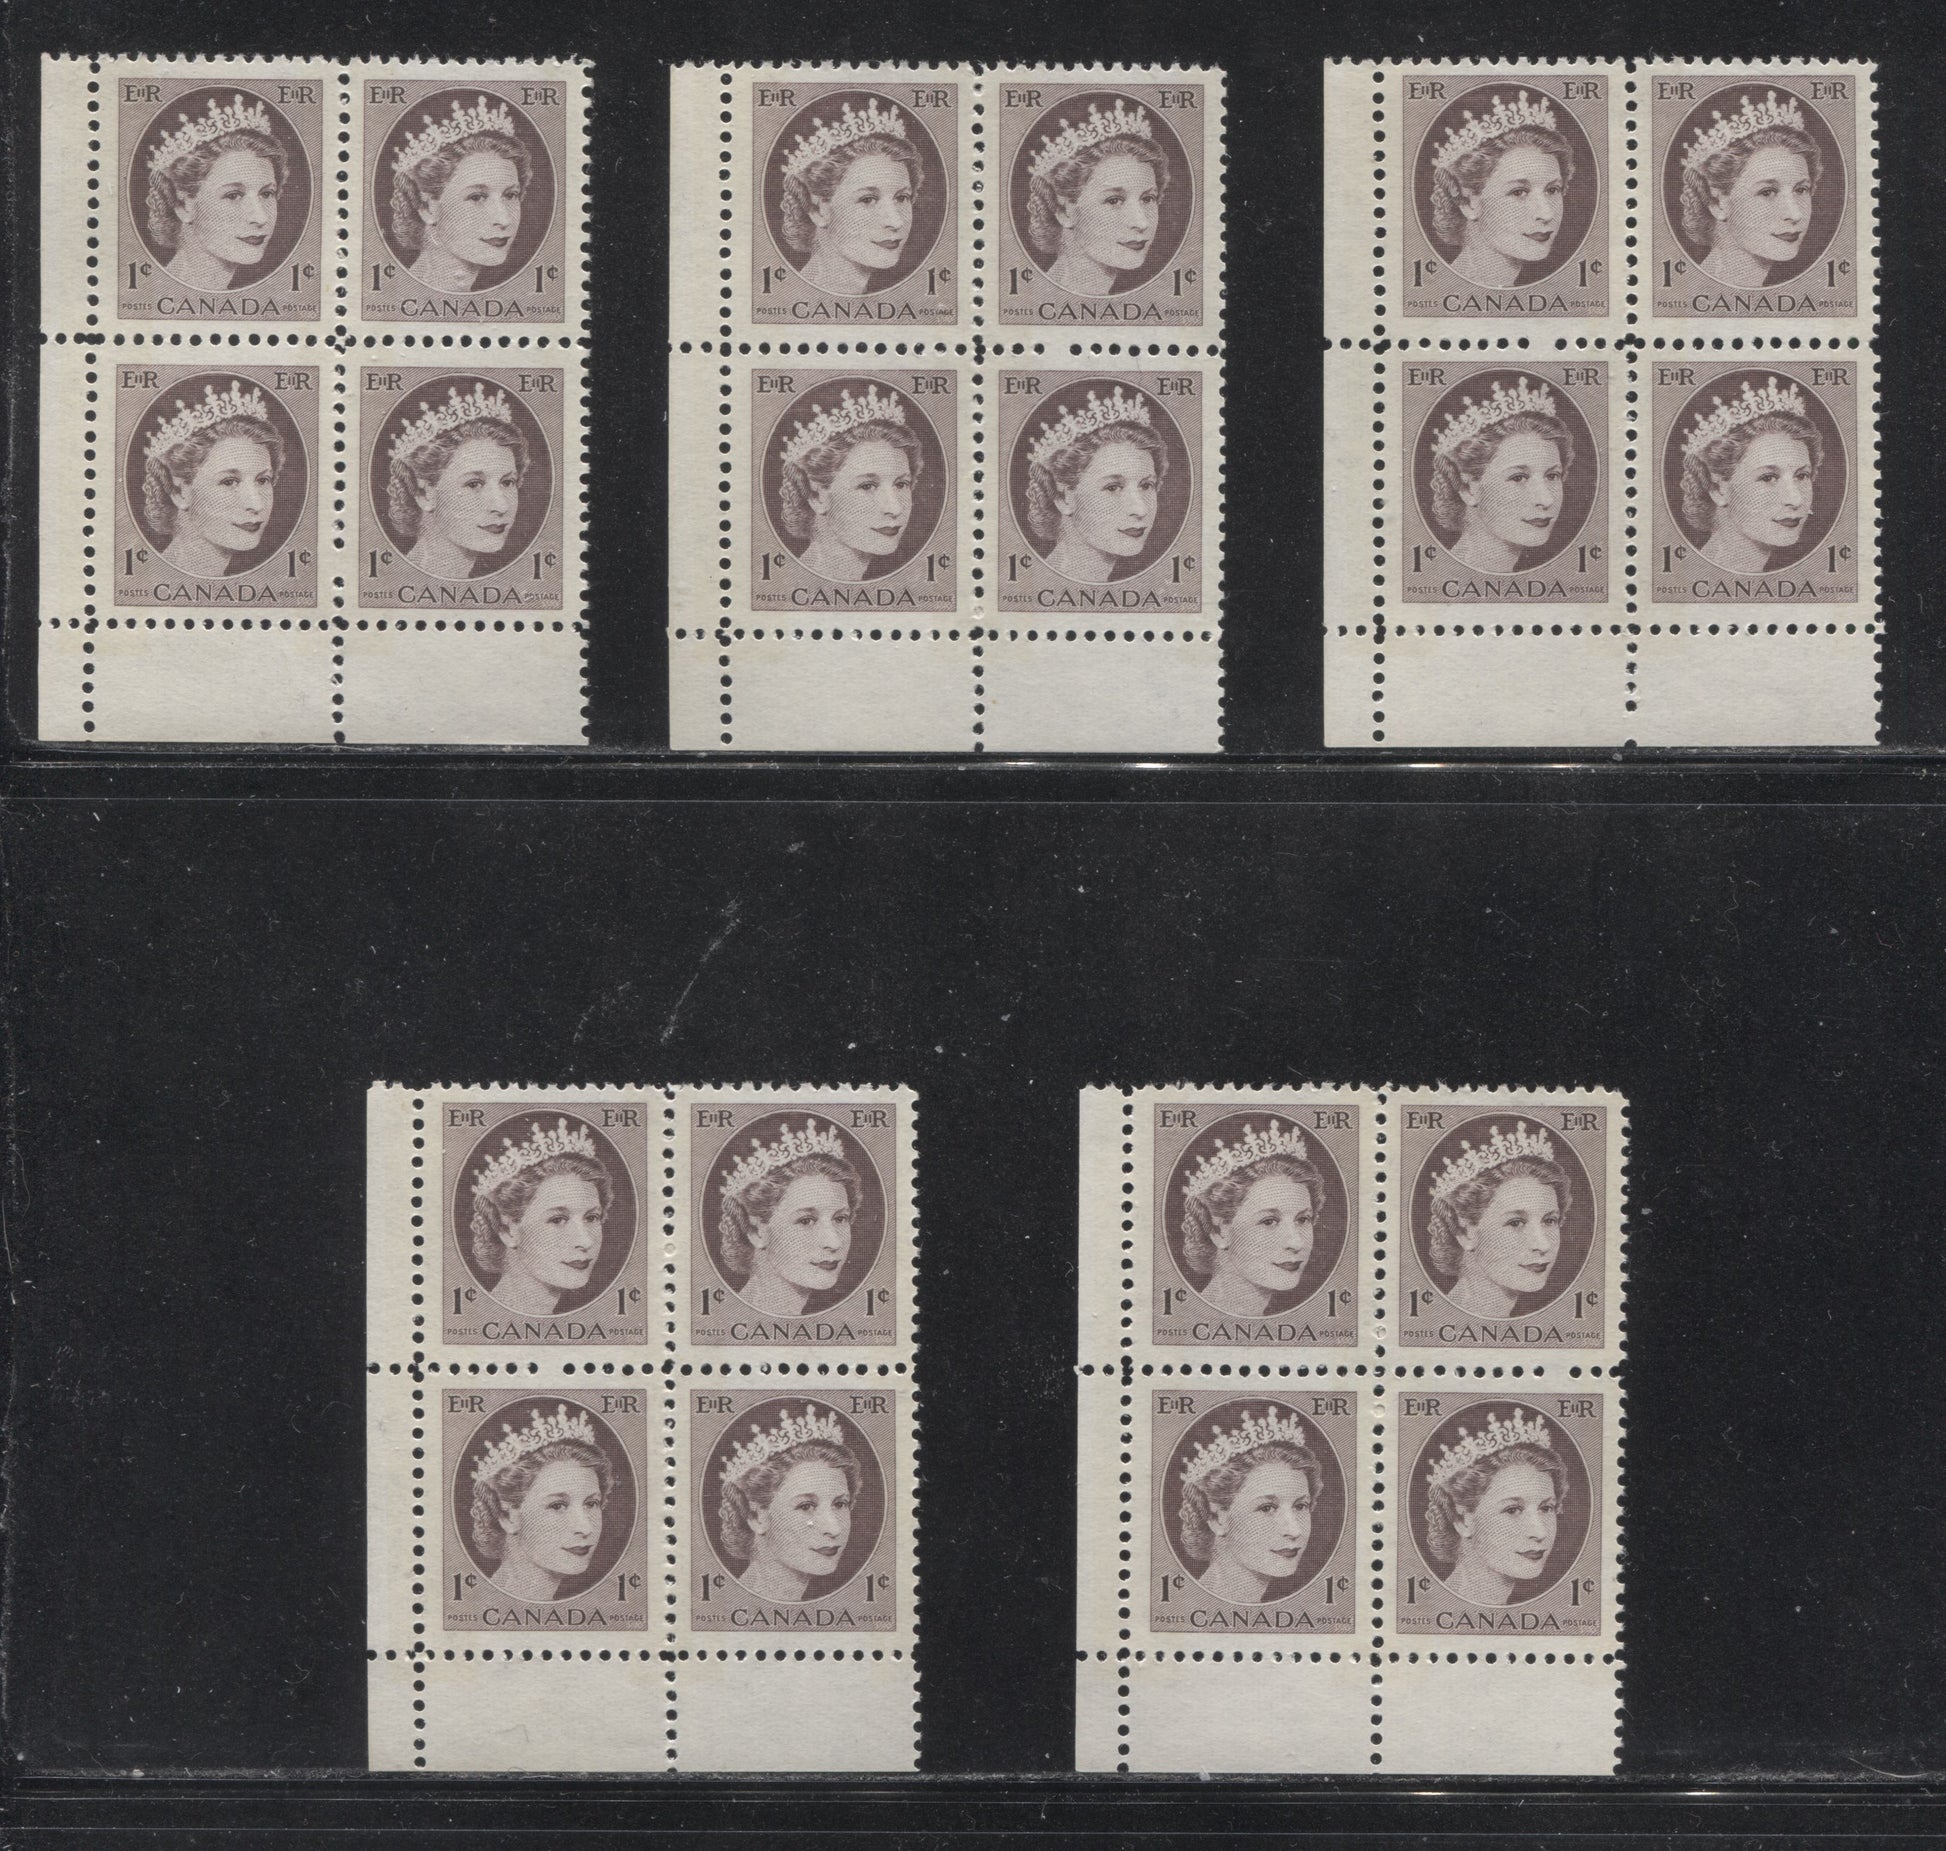 Canada #337p(var) 1c Chocolate Queen Elizabeth II, 1954-1962 Wilding Issue, Lower Left Blank Winnipeg Tagged Blocks of 4, Five Different, Various Perfs., DF Gr Vertically Ribbed Paper, Streaky Semi Gloss Gum, Bluish White Tagging, Broken Perf. Pins, VFNH Brixton Chrome 